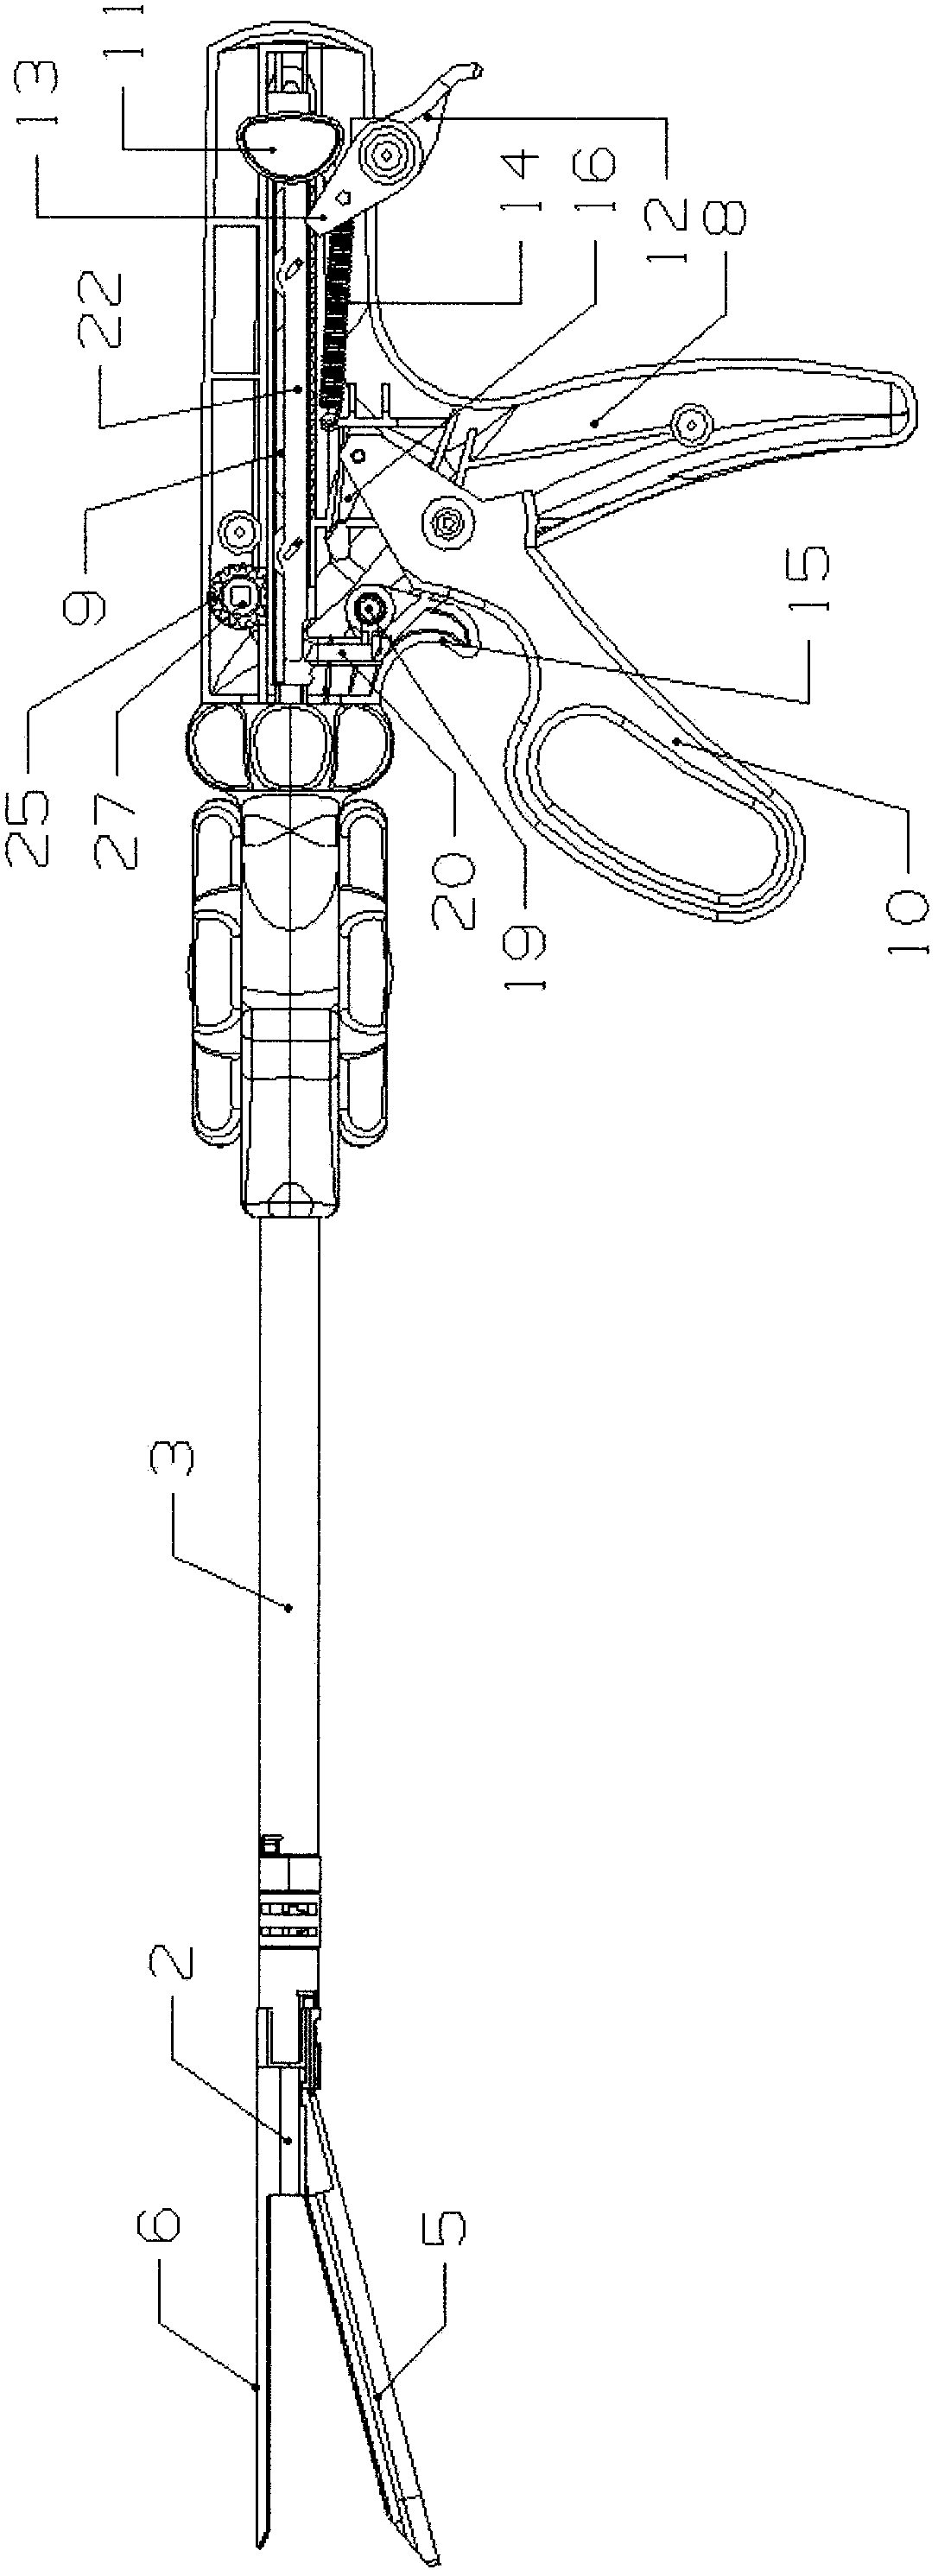 Endoscope surgical stapler capable of being forcibly reset